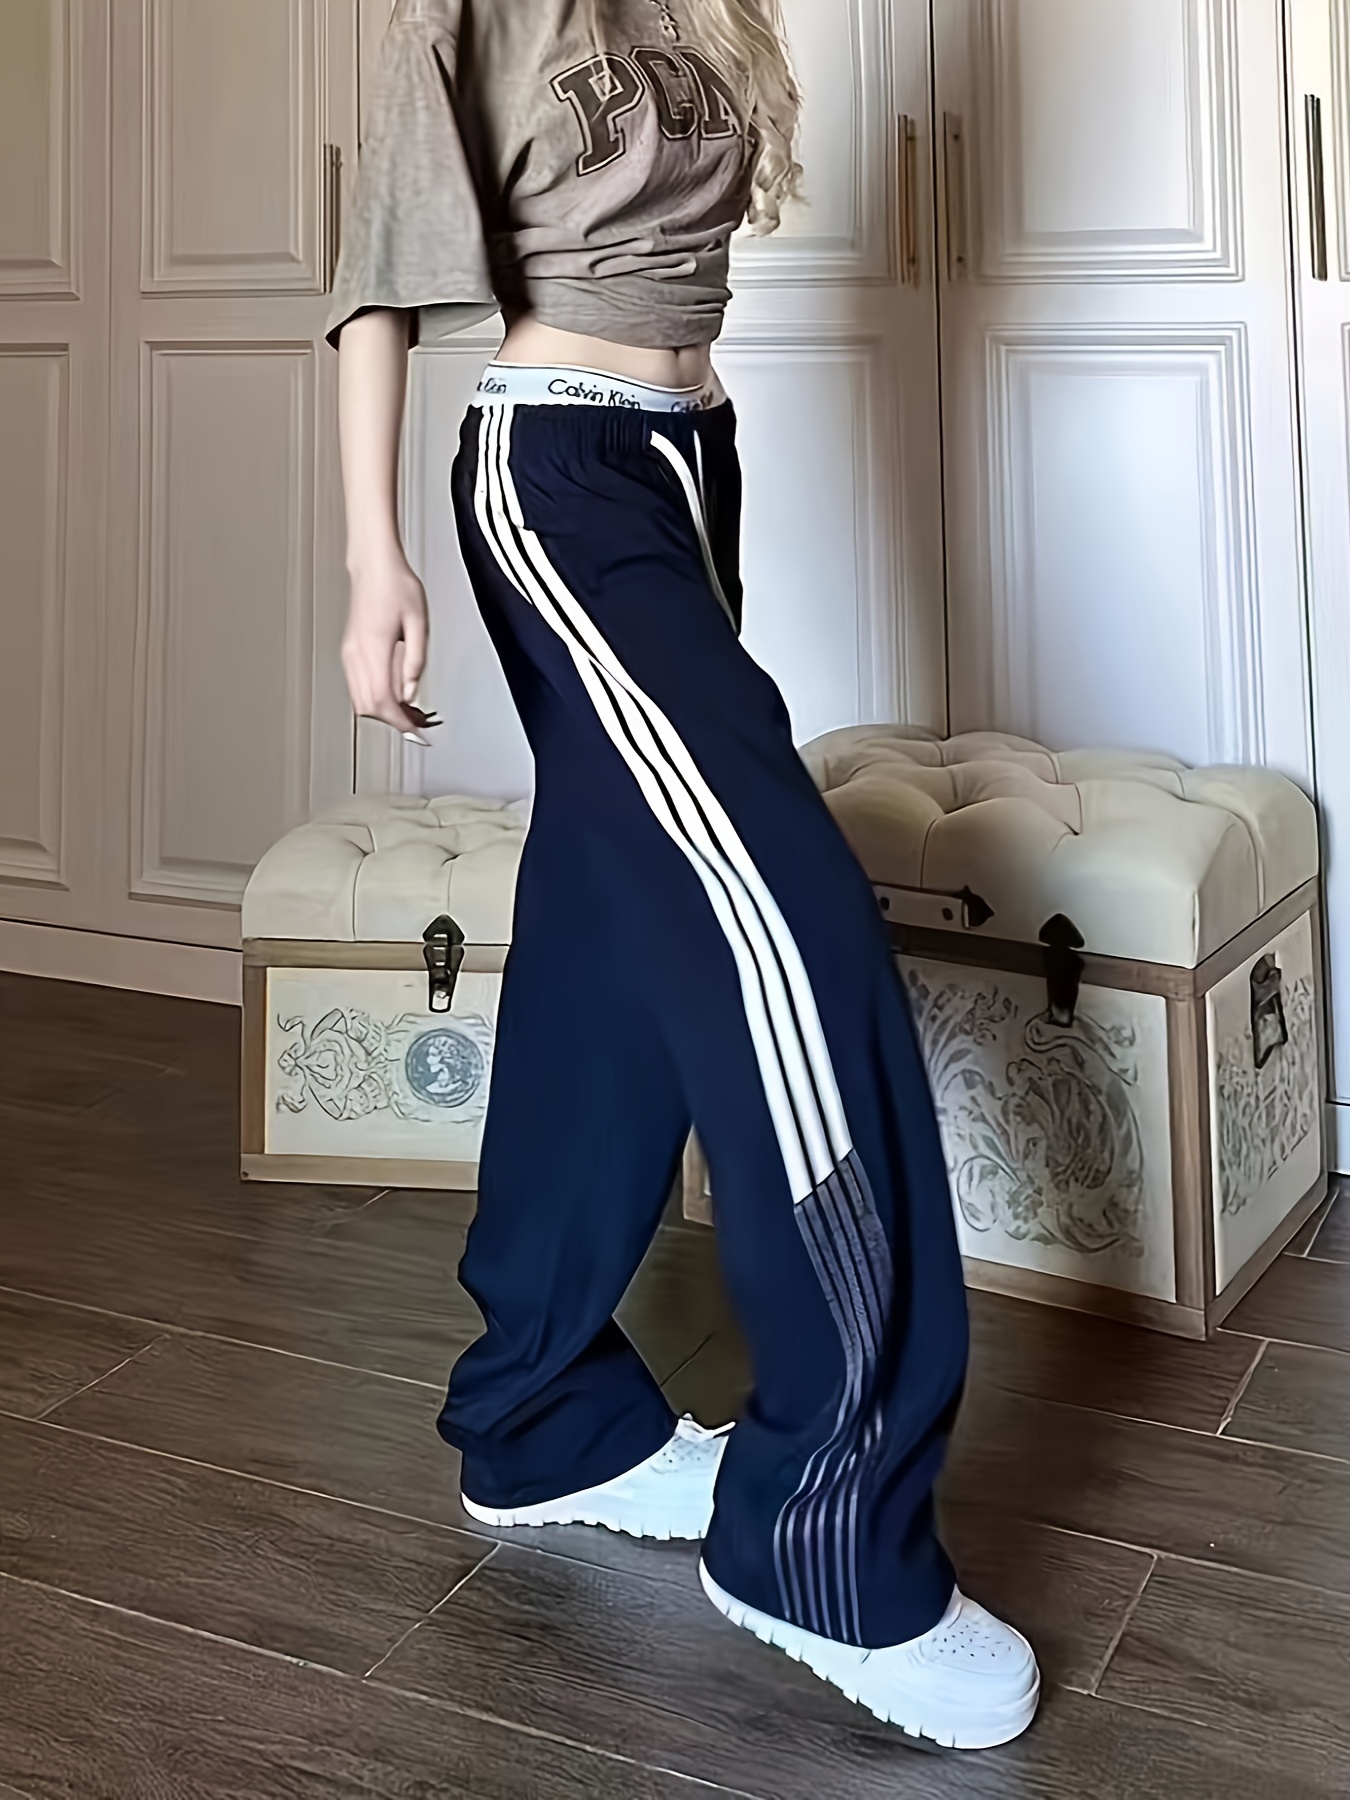 Women's Activewear: White Strip Stitching Casual Loose Sports Pants -  Summer Personality Street Wide Leg Pants